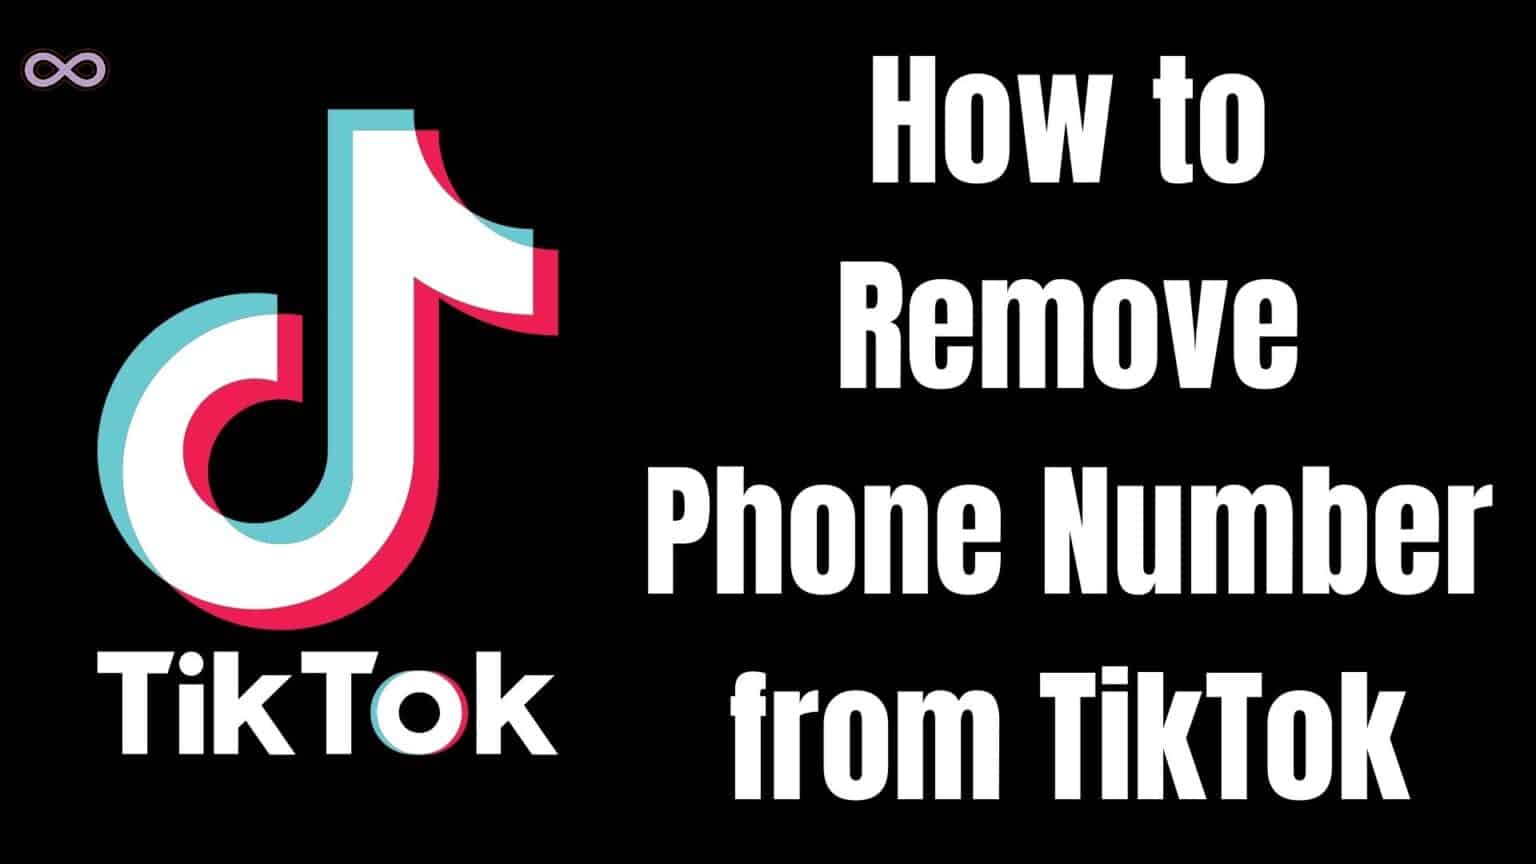 How to Remove Phone Number from TikTok